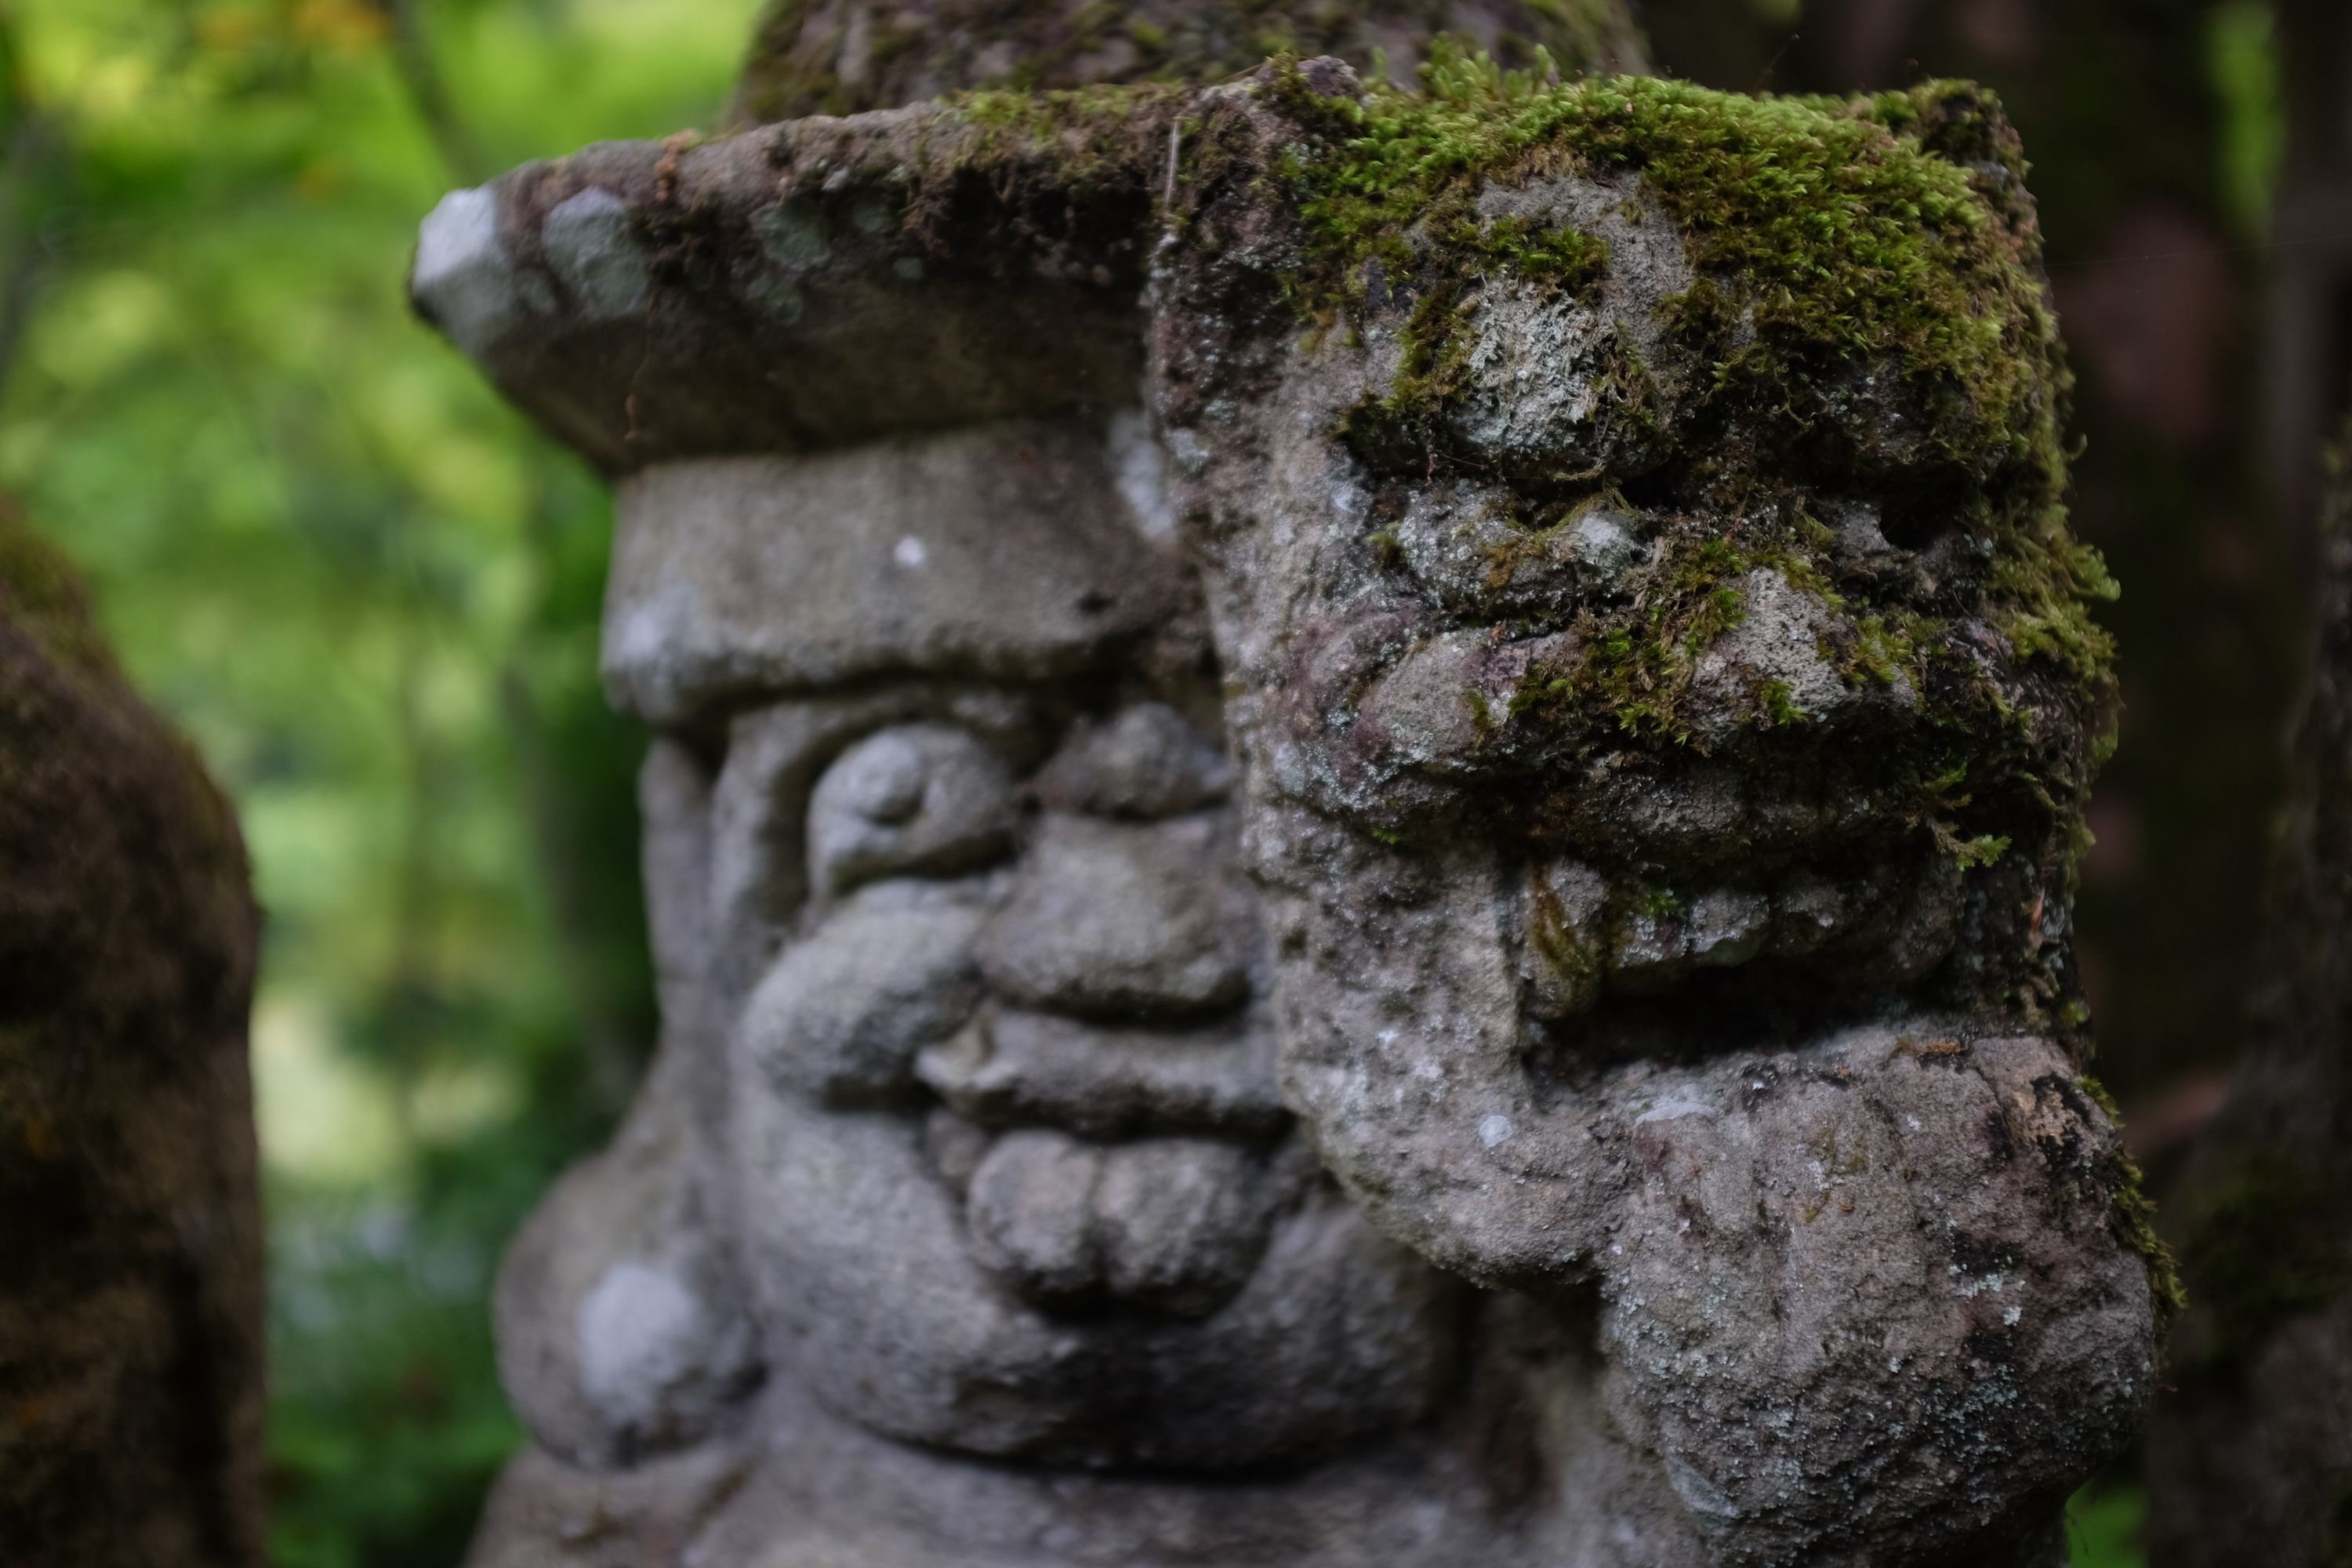 Two moss-covered stone statues of heads, one with bulging eyes and its tongue sticking out.